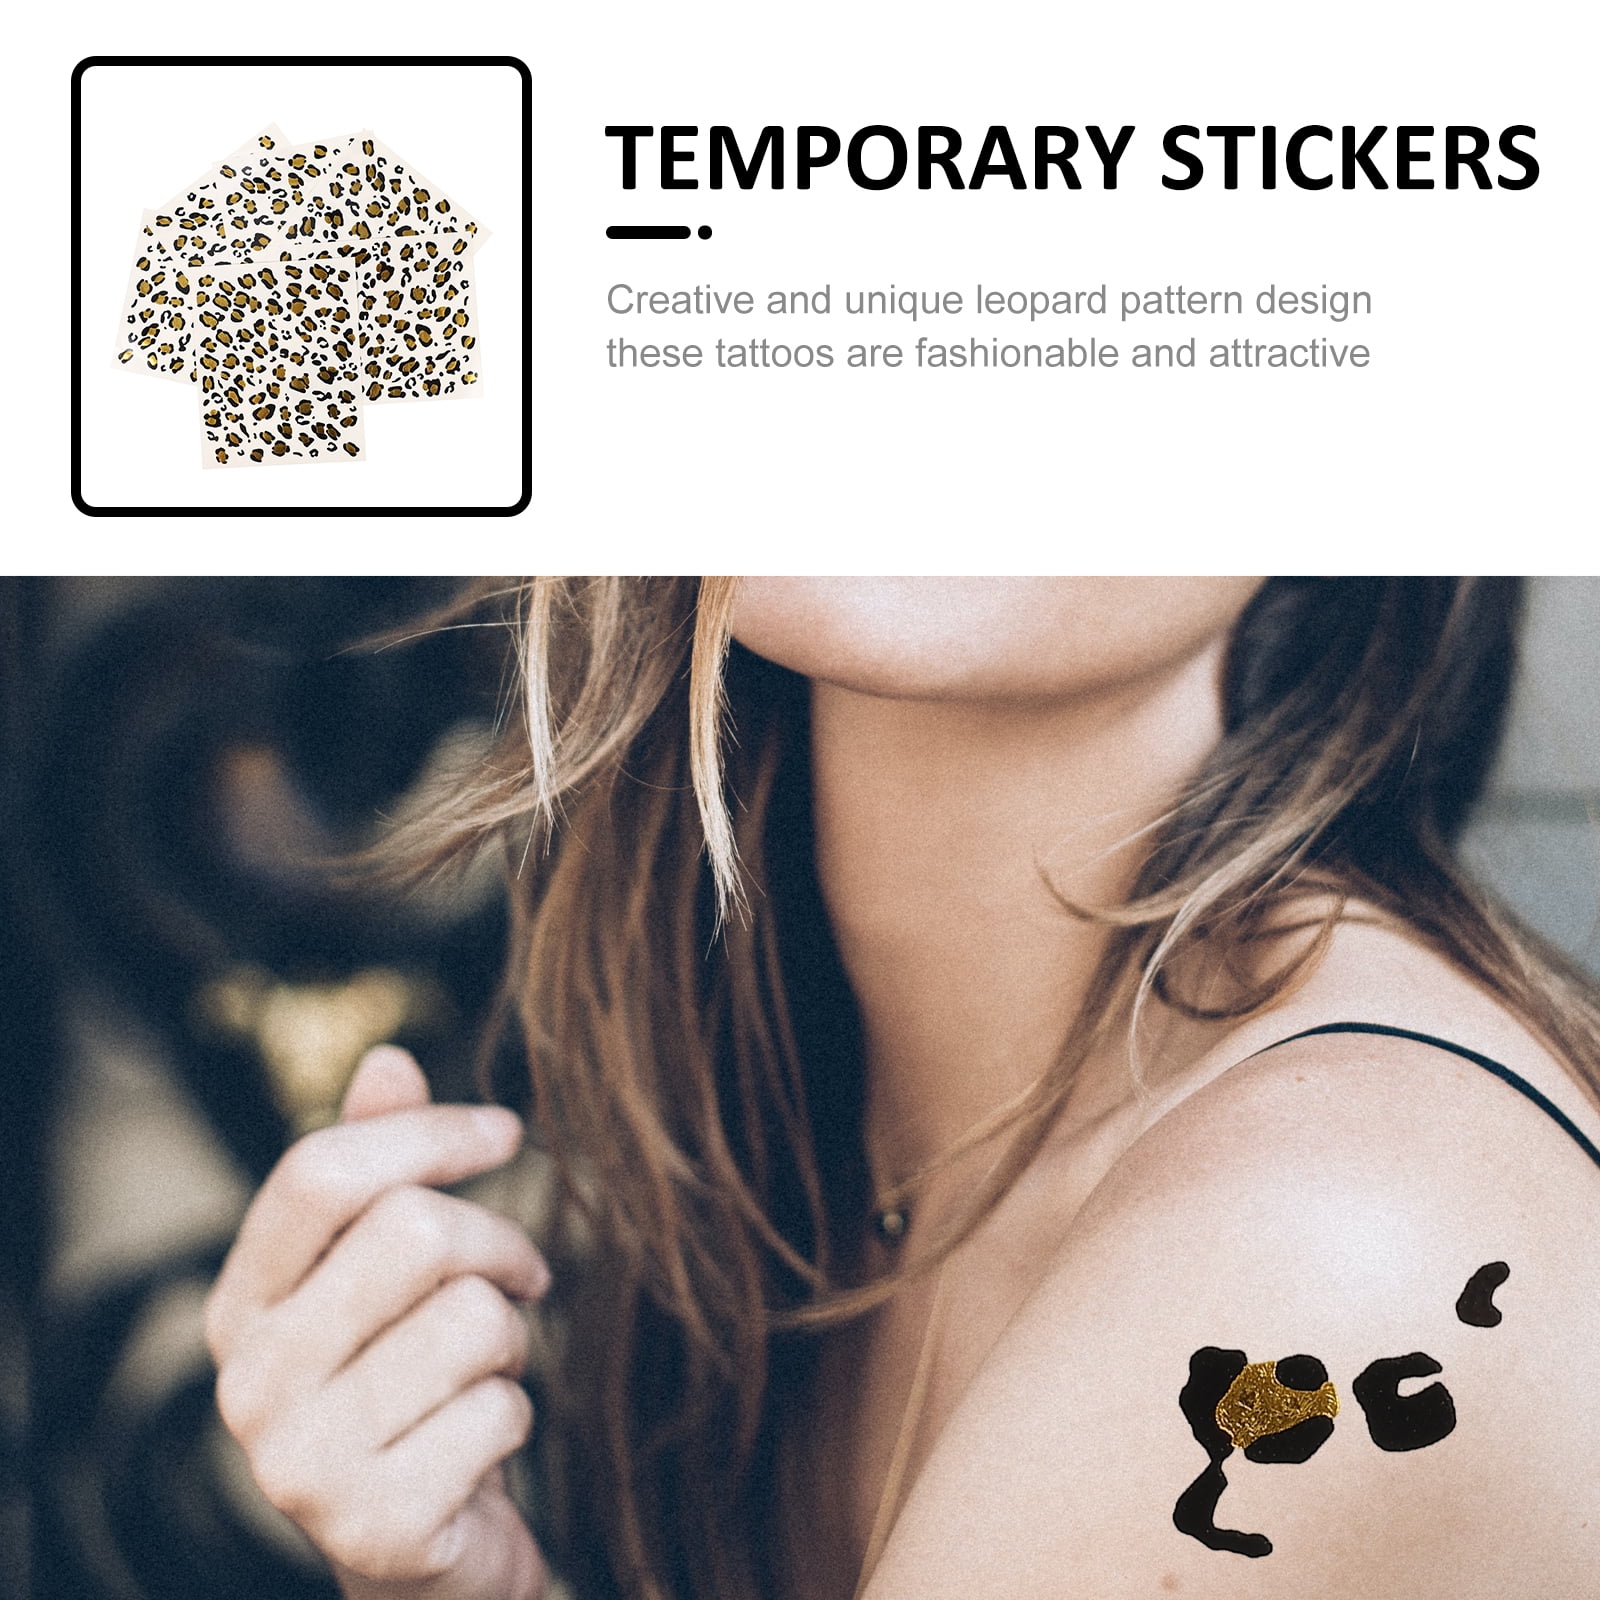 Amazon.com : Leopard Face Tattoos, 6-Sheet Leopard Face Temporary Tattoo  for Men Women Adults Kids Halloween Costume Accessories and Parties :  Beauty & Personal Care